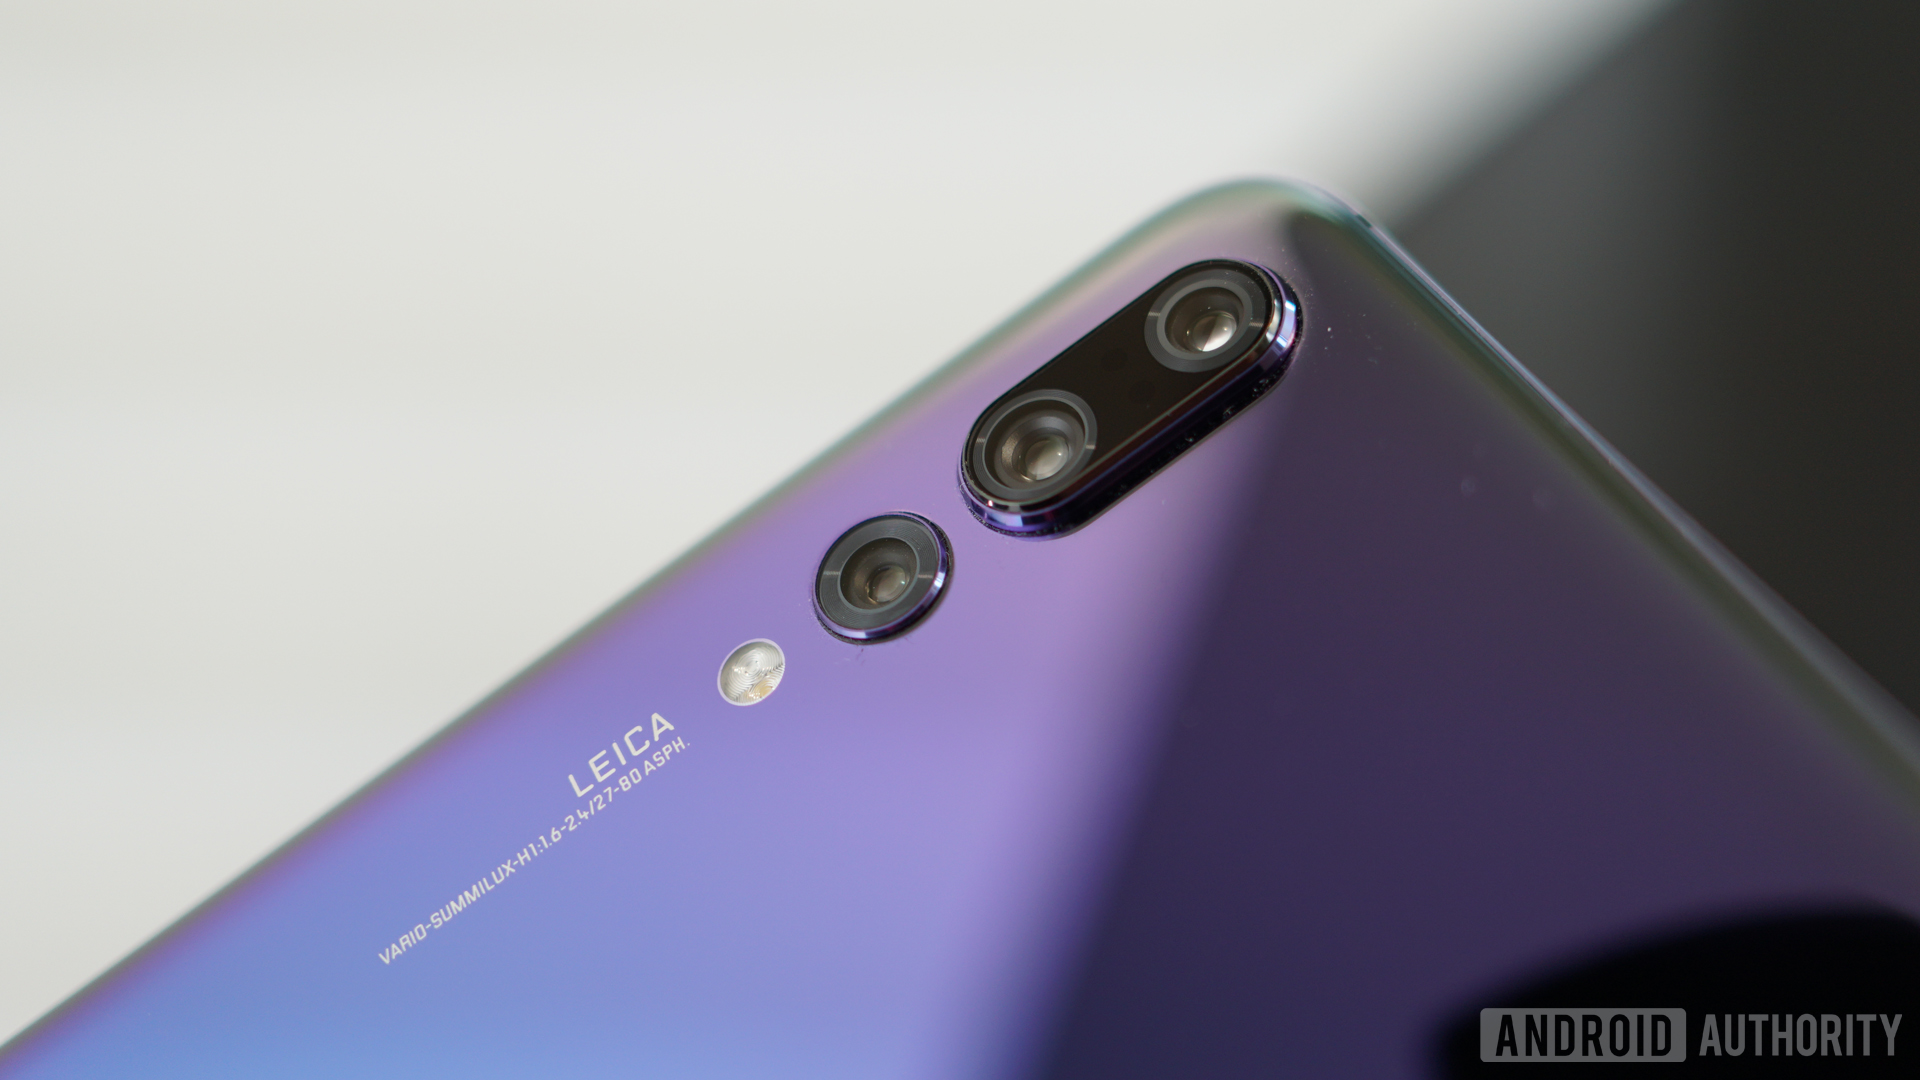 The Huawei P20 Pro with Leice tripple camera